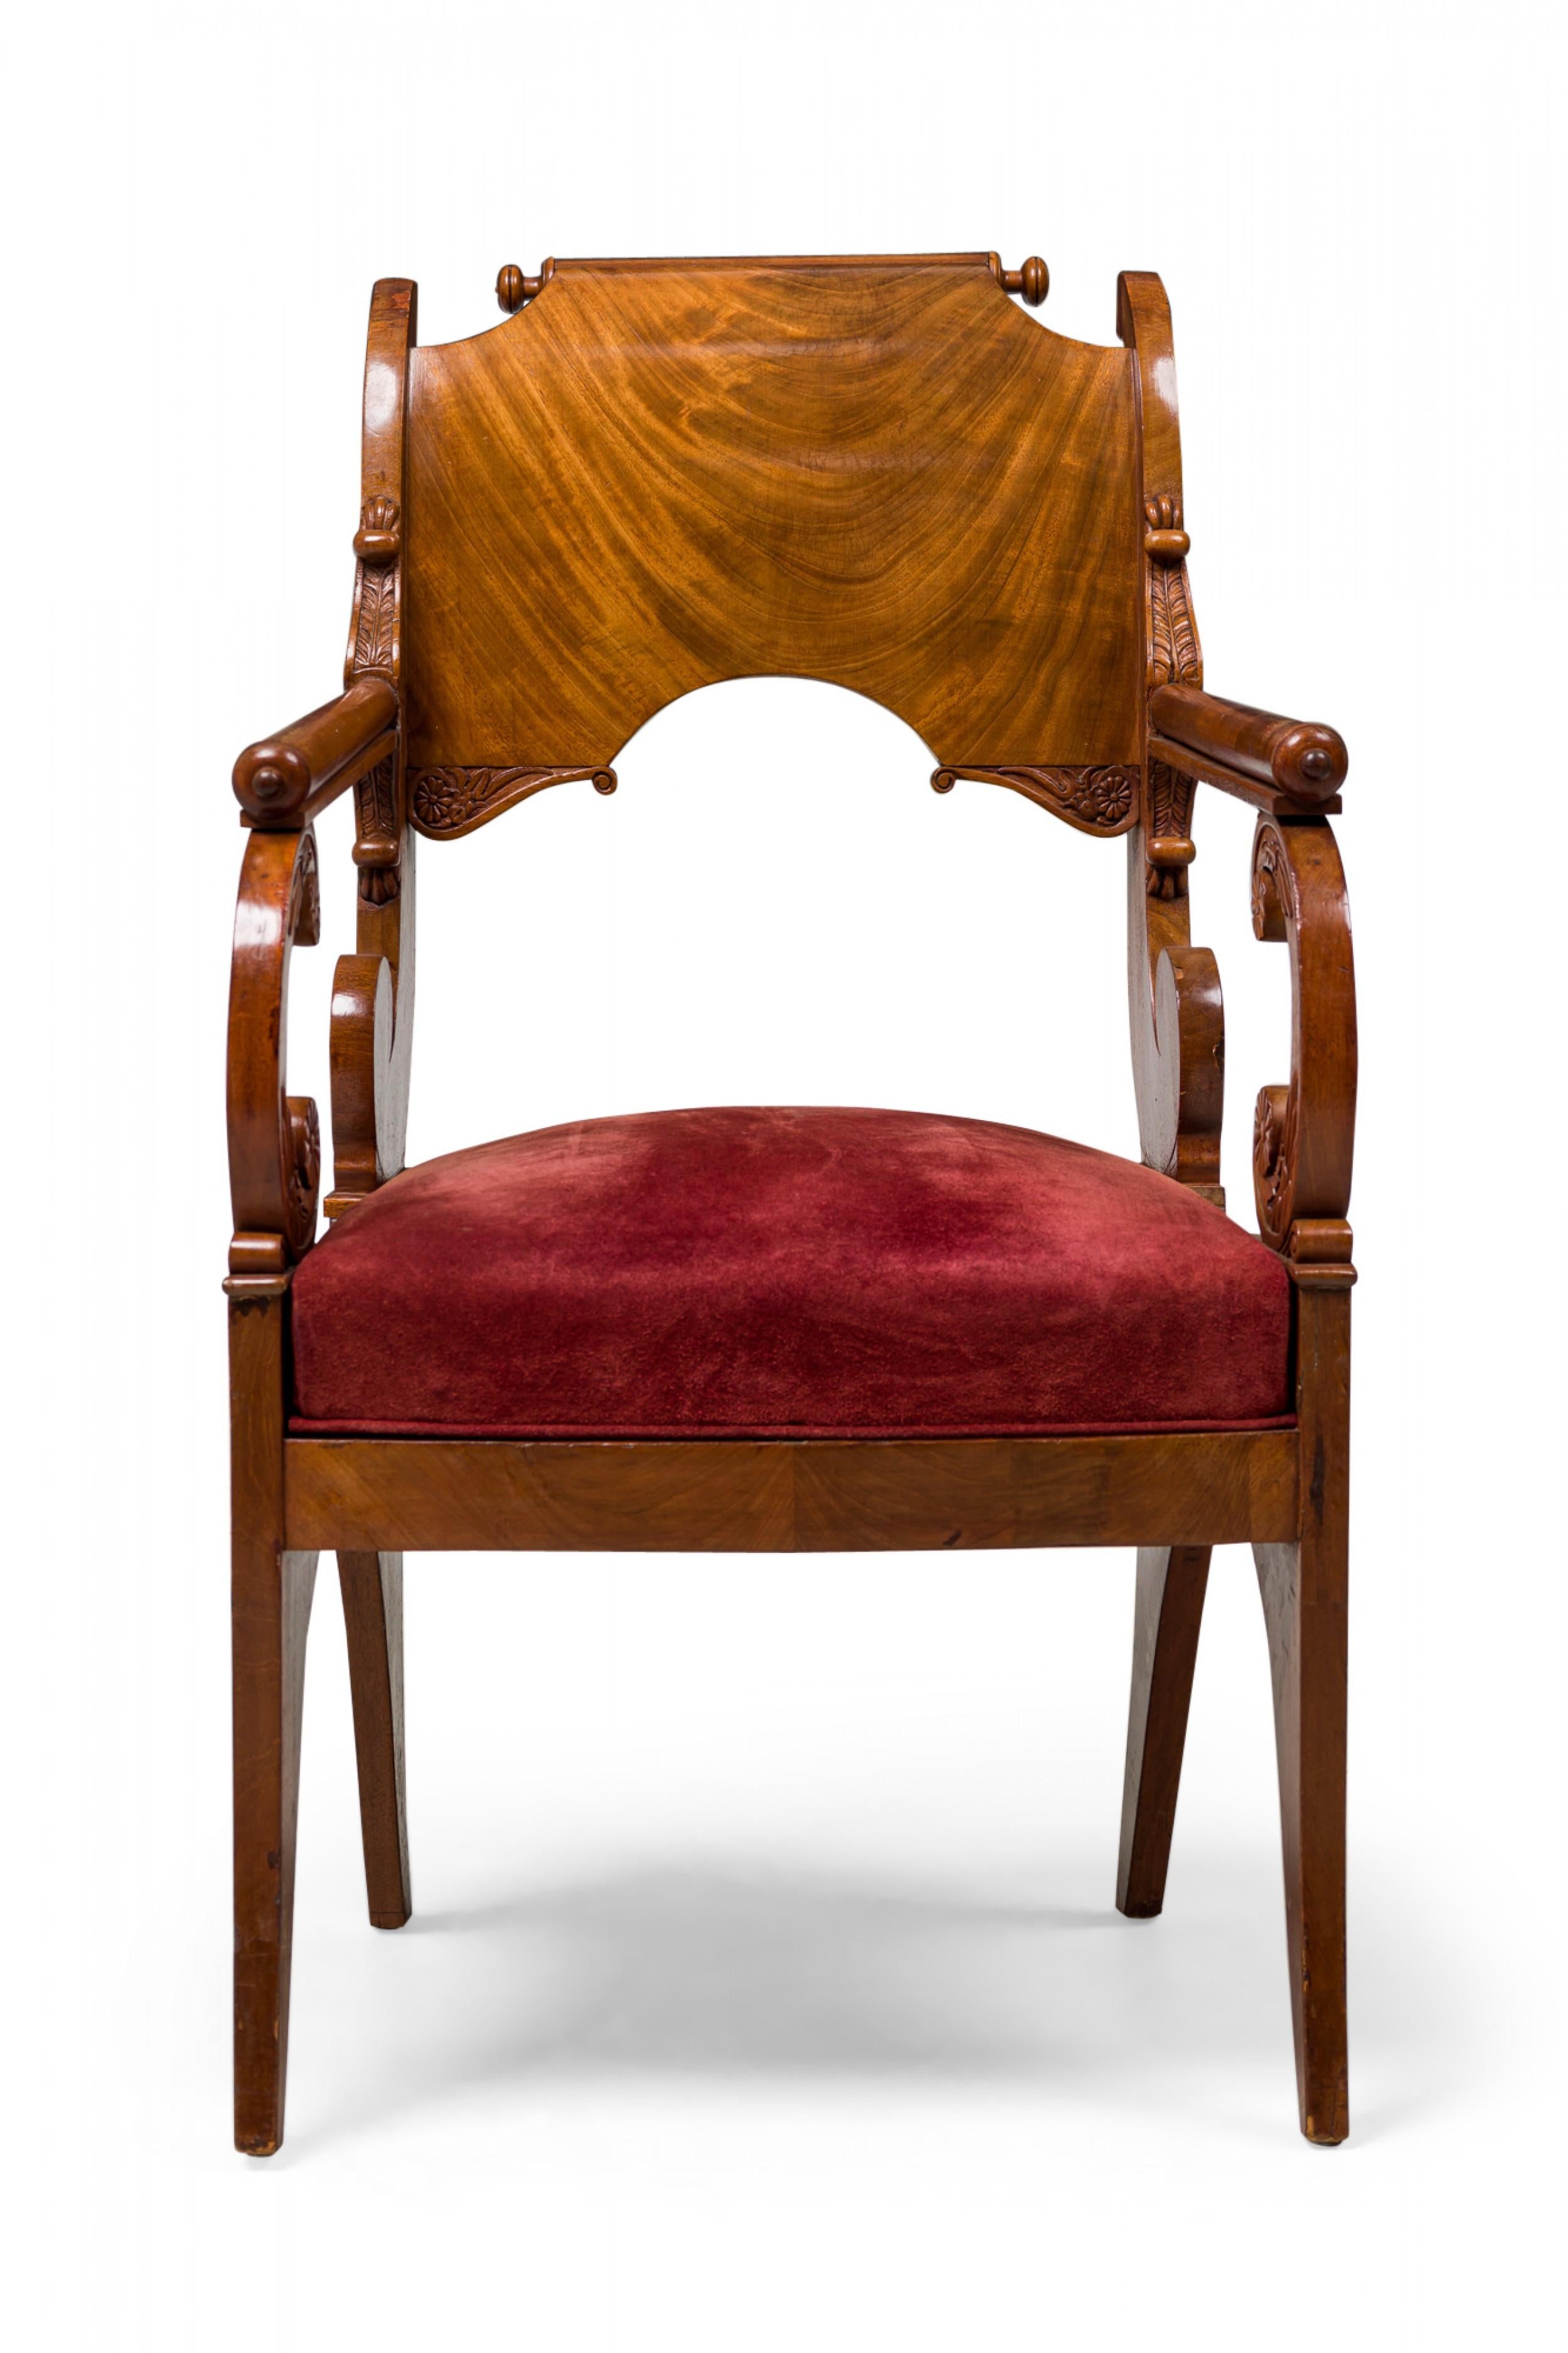 SET of 4 Russian neoclassic mahogany armchairs in elaborate scroll form with a curved upper backrest and arms, carved acanthus decoration with reeding and floral medallions, and red suede upholstered seats and cut out arched legs. (PRICED AS SET).